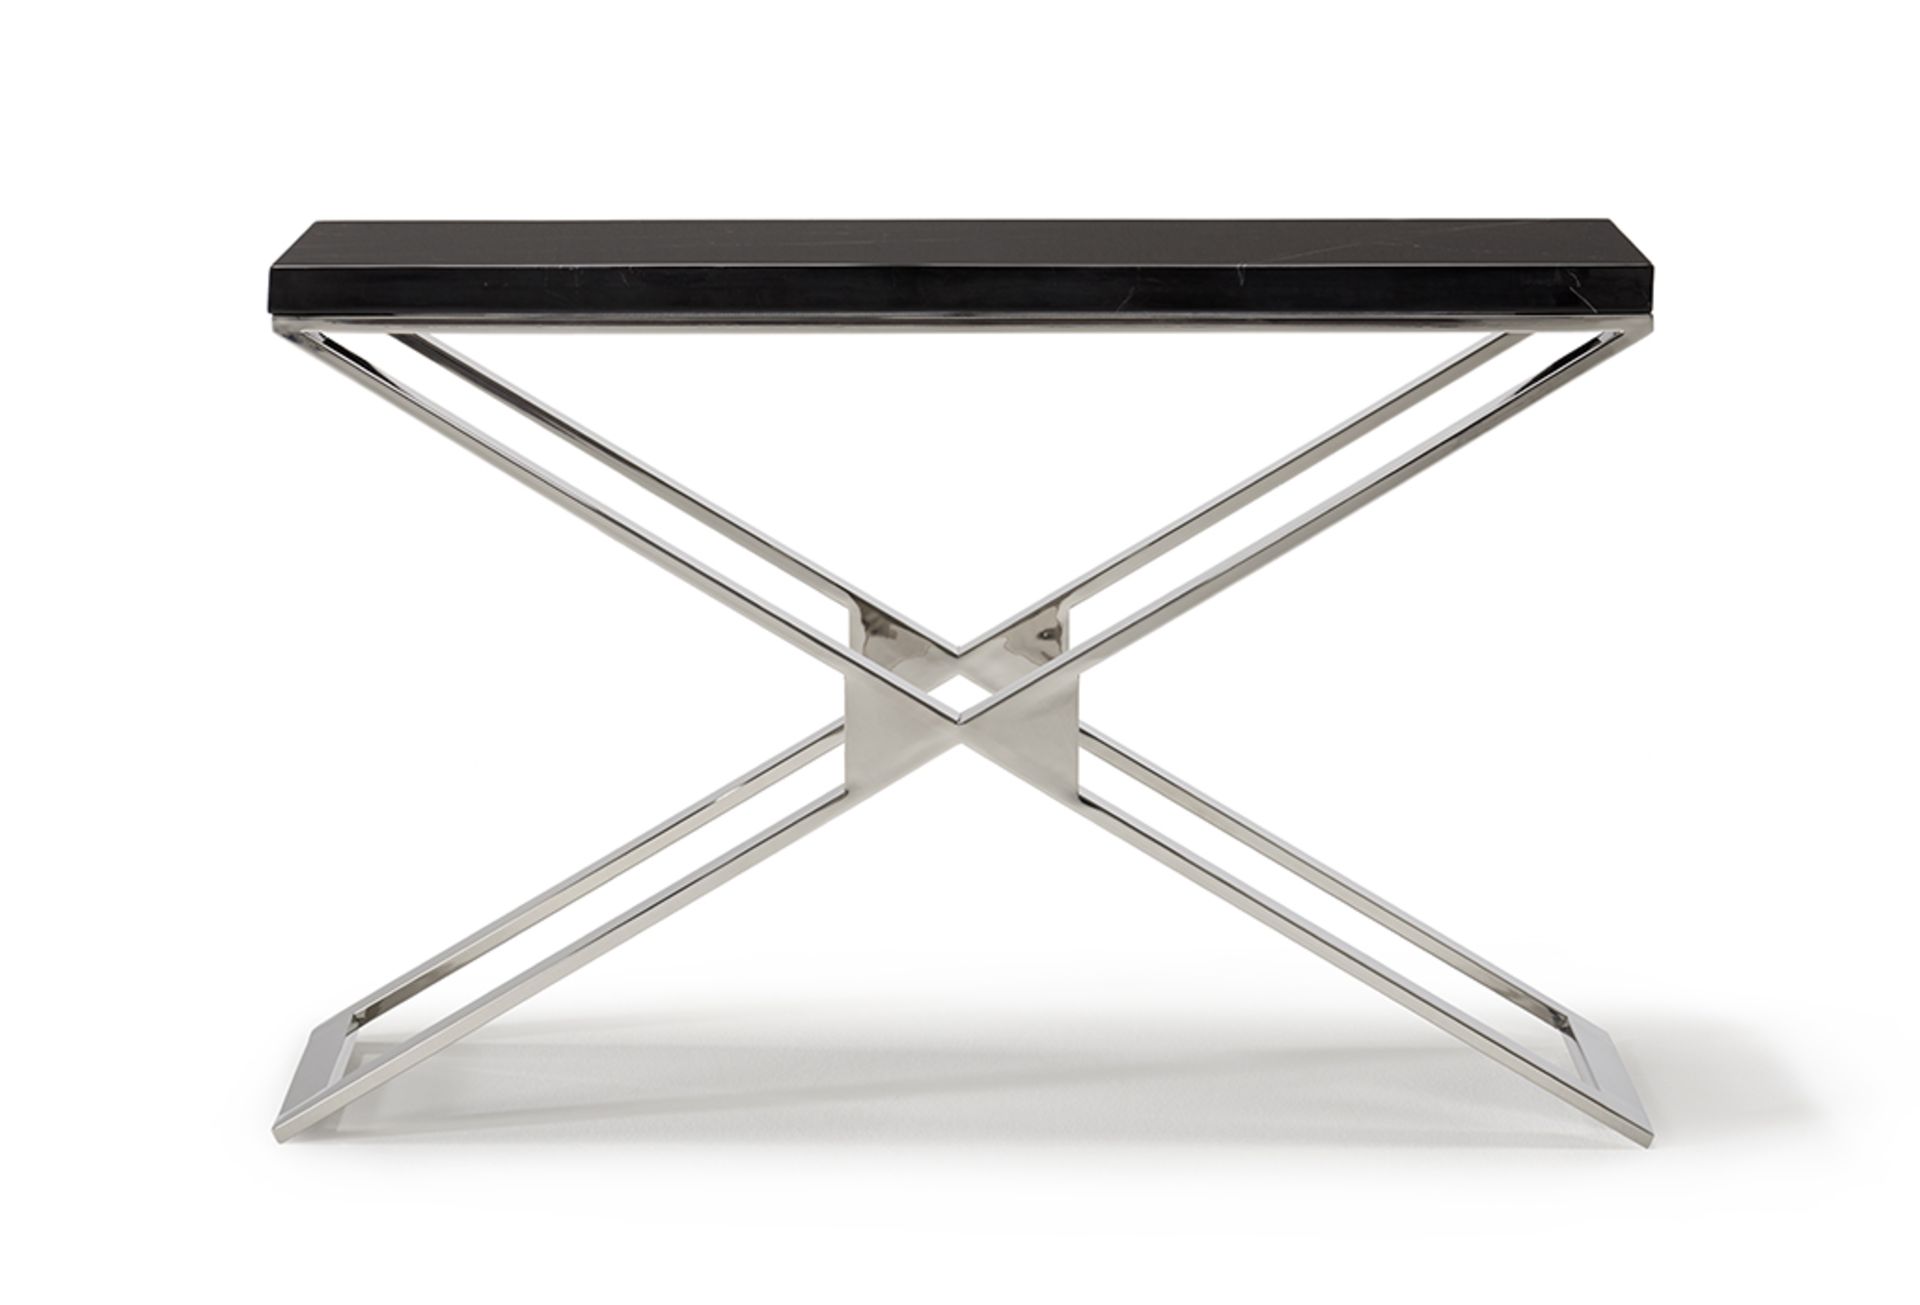 Zephyr Console Table by Kesterport This Console Table has a classic frame design which we have - Image 7 of 7